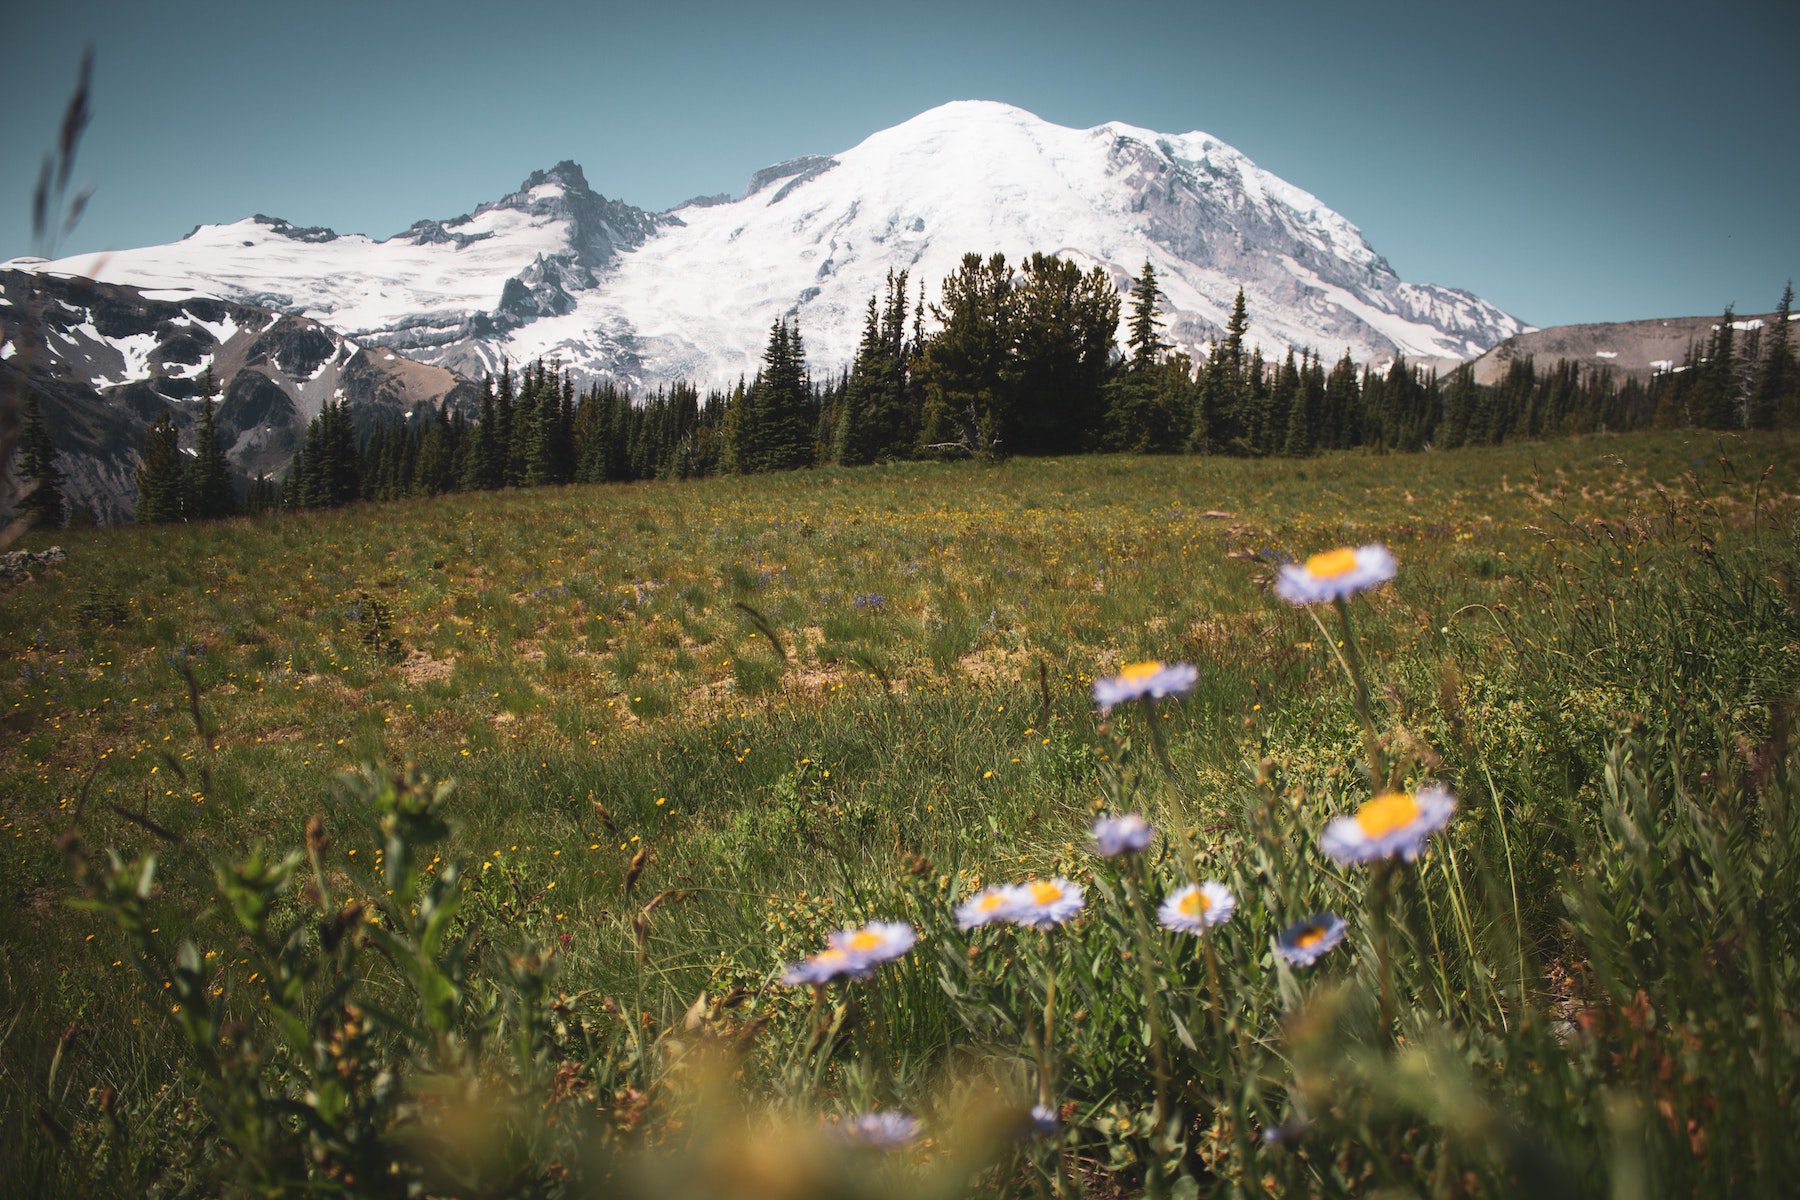 Snowy mountain behind a green meadow of wildflowers in the spring season in Mount Rainier, one of the country's lesser-visited national parks.